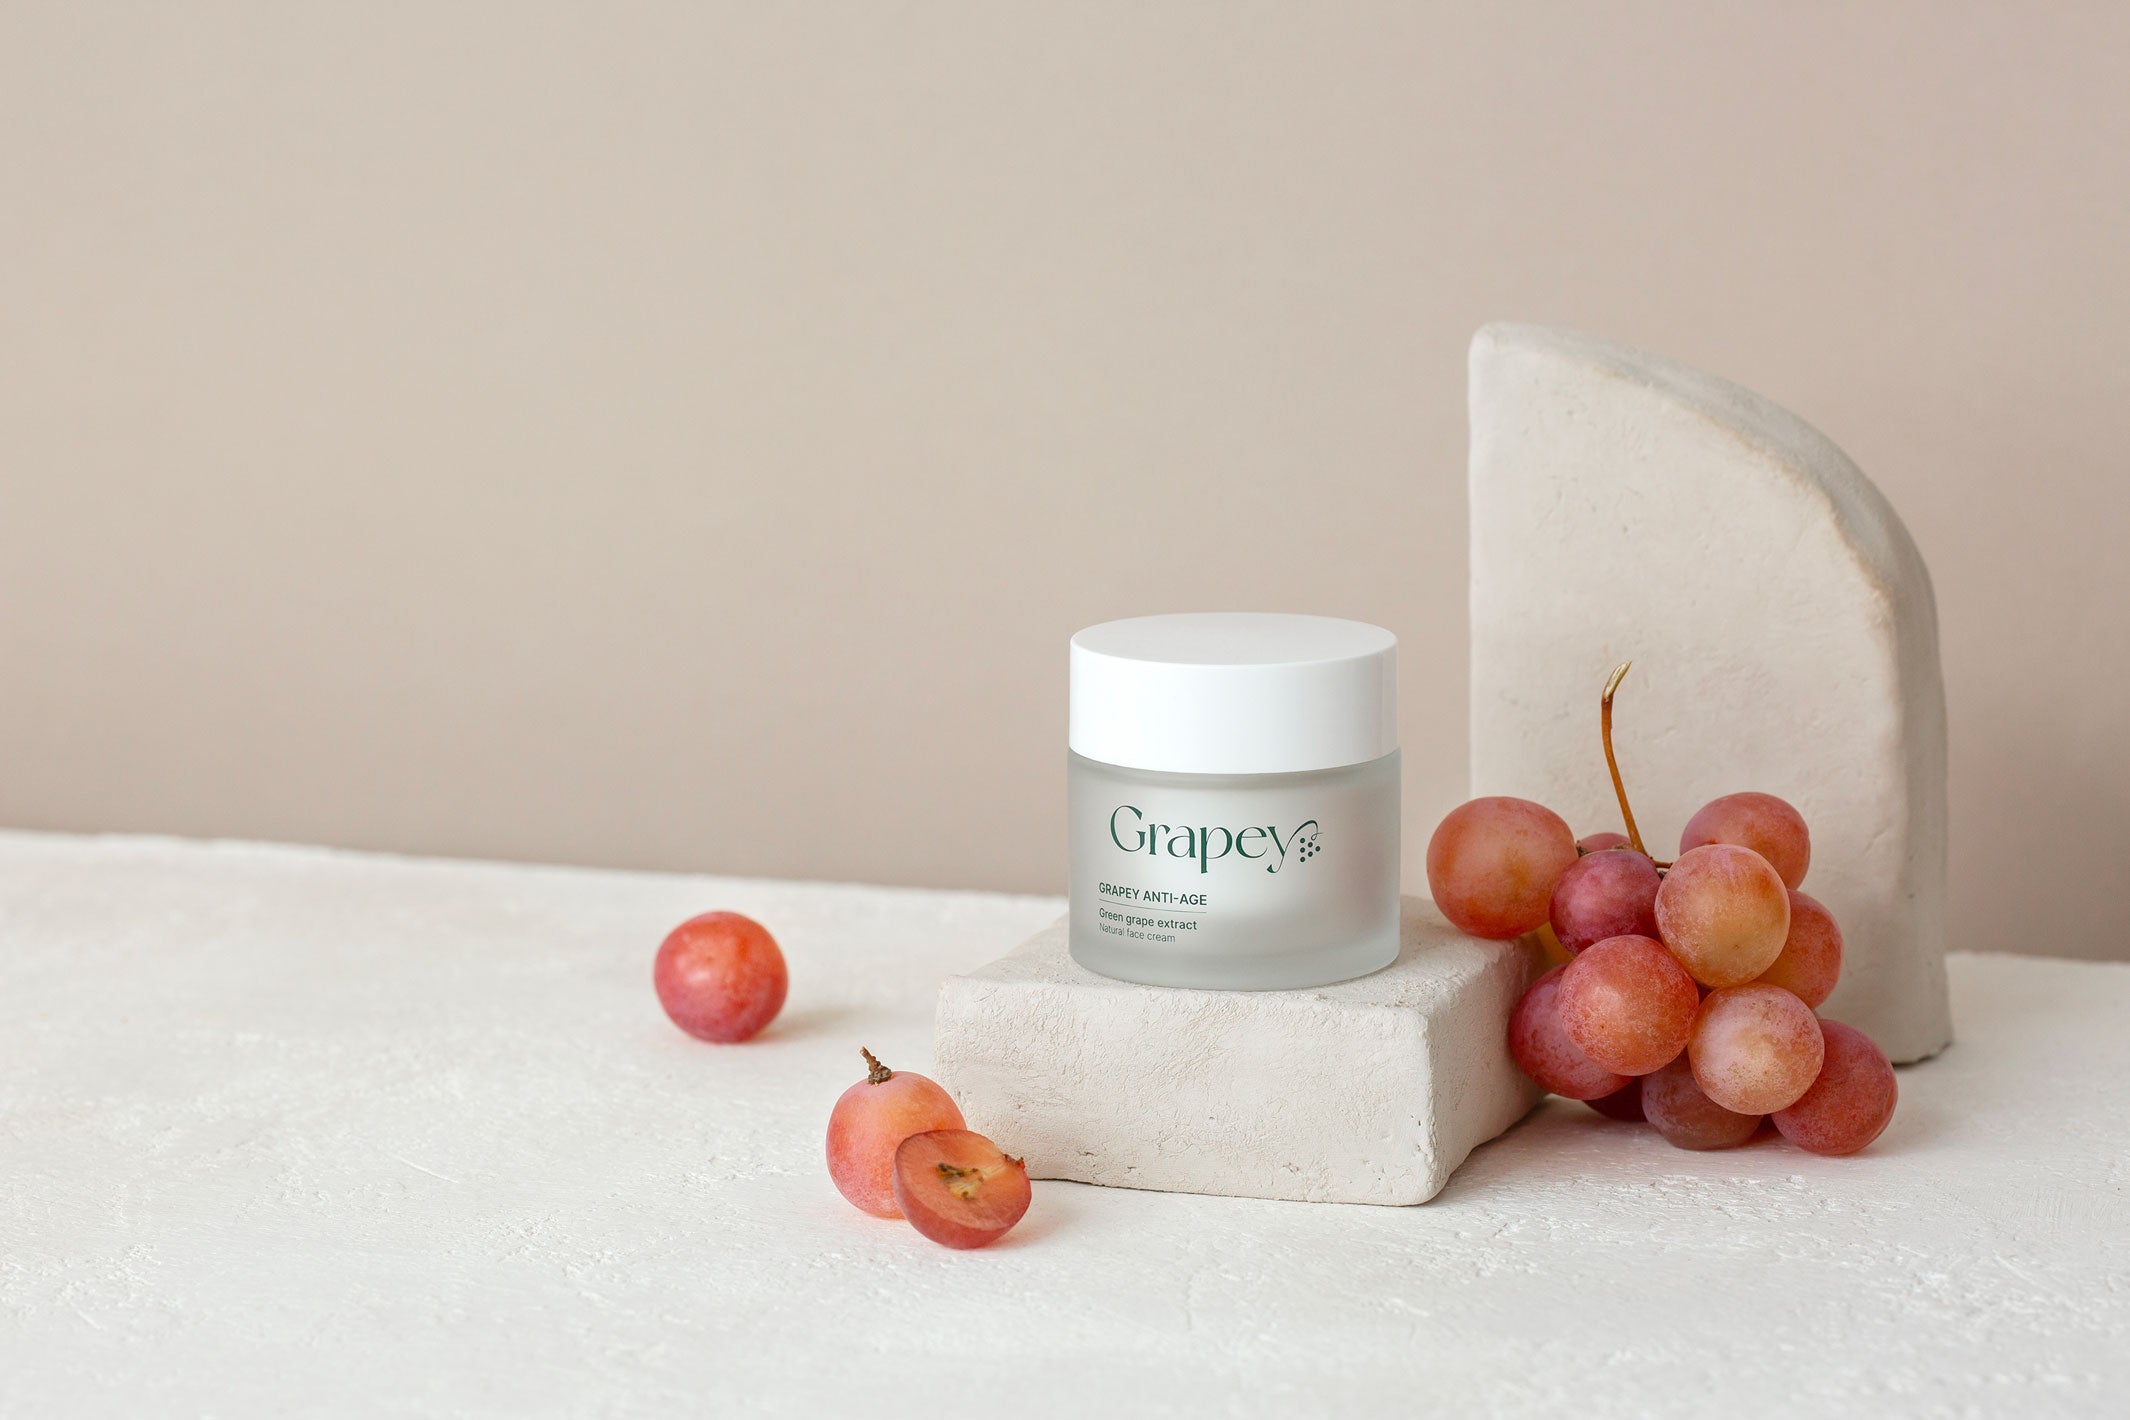 Grapey Anti age woman grape face cream grapes and seeds